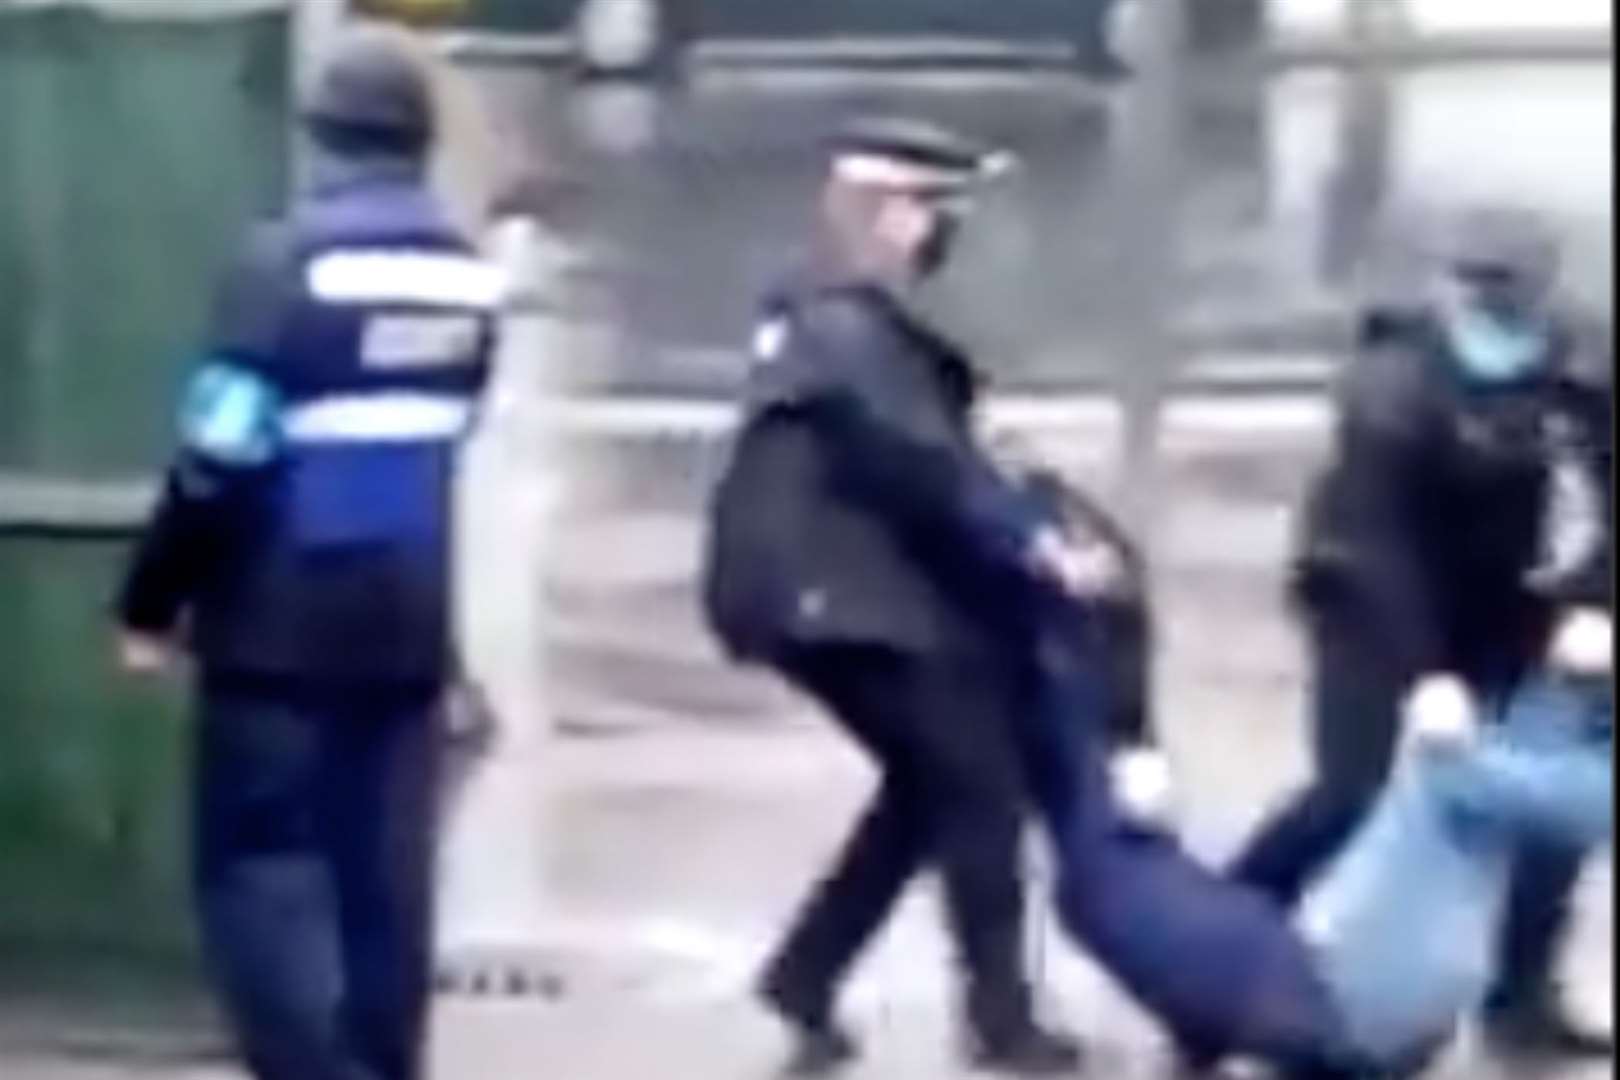 A video has been circulated showing officers carrying an asylum seeker back into the barracks